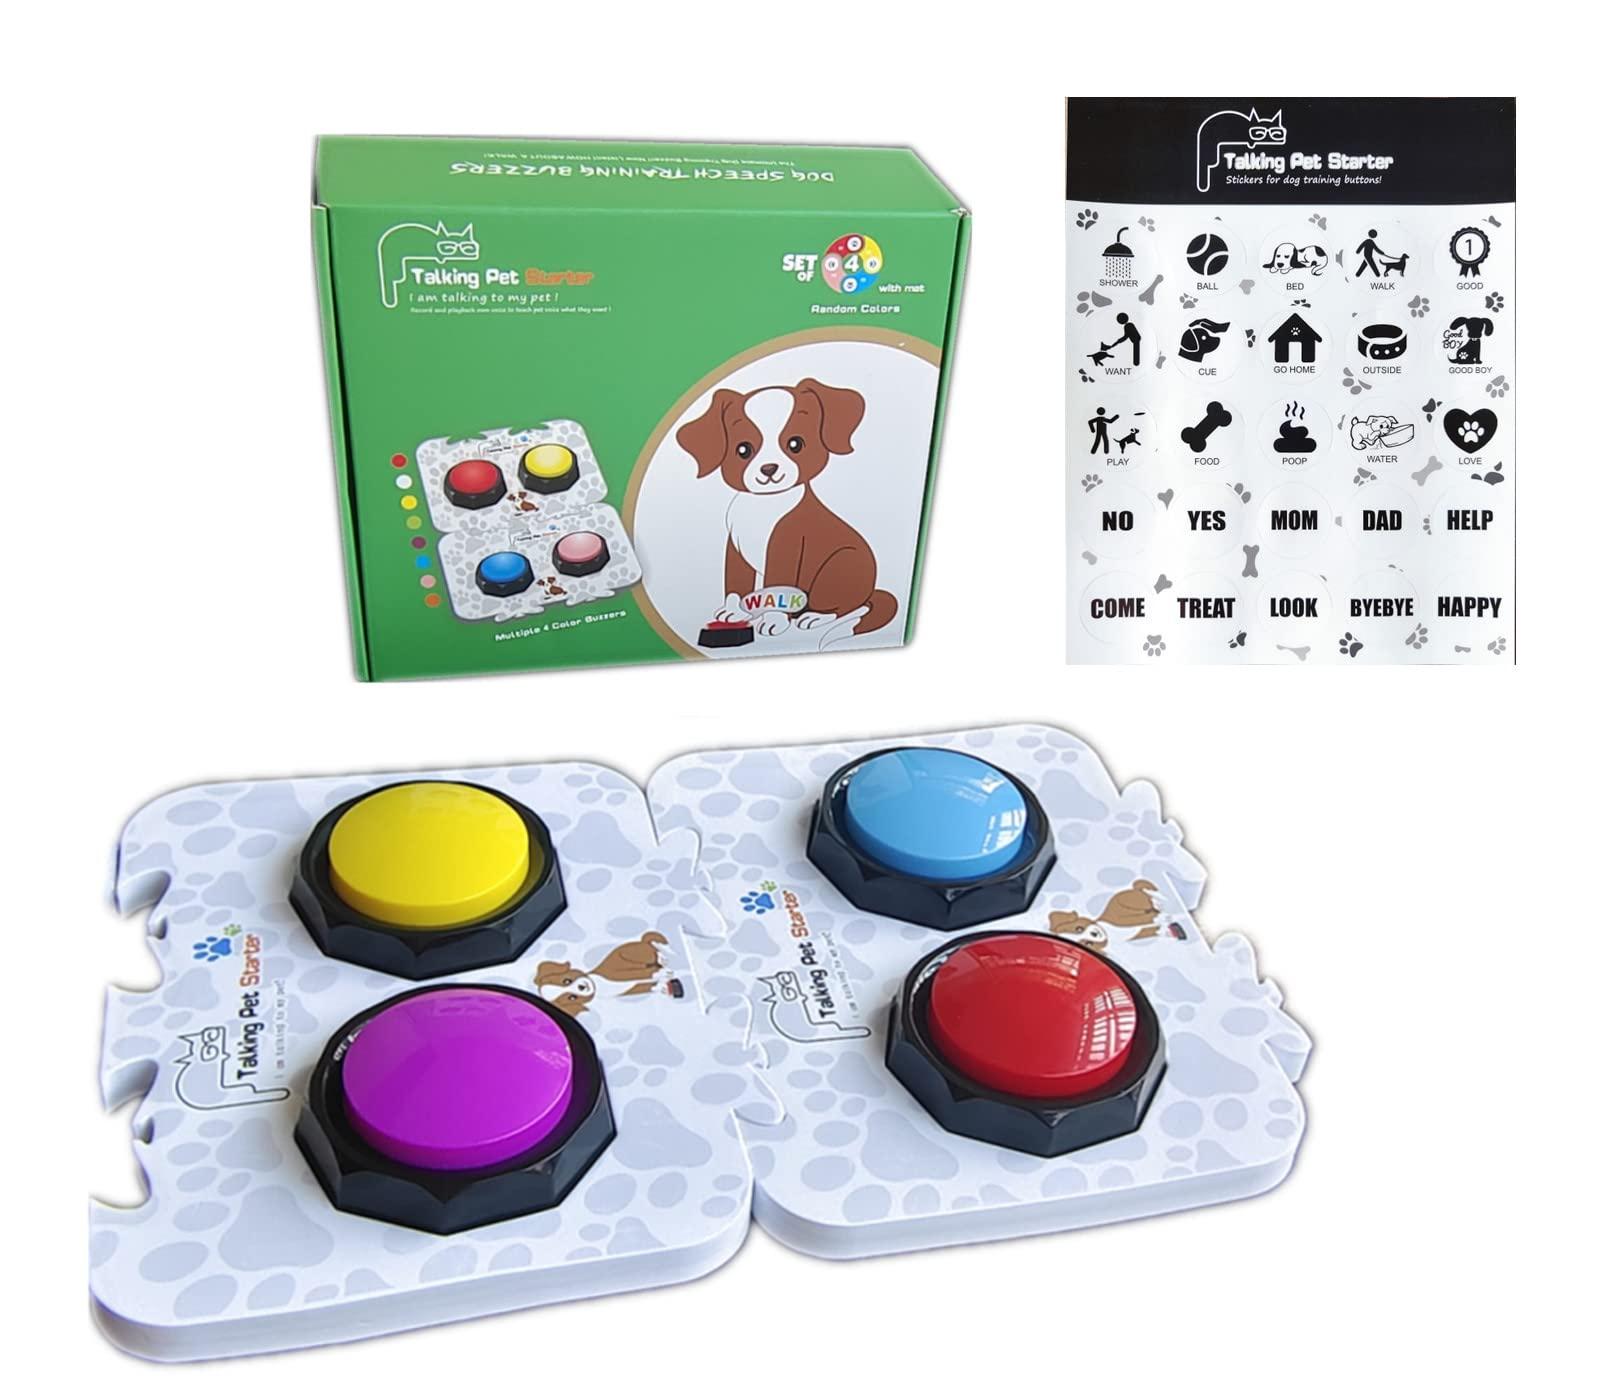 BOSKEY Set of 4 Dog Buttons?Including 2 mats, 25 Stickers, Training Guide.Dog Voice Training Buzzer,Recordable Button,Train Your Dog to Make The Sound They Want (Battery Included)